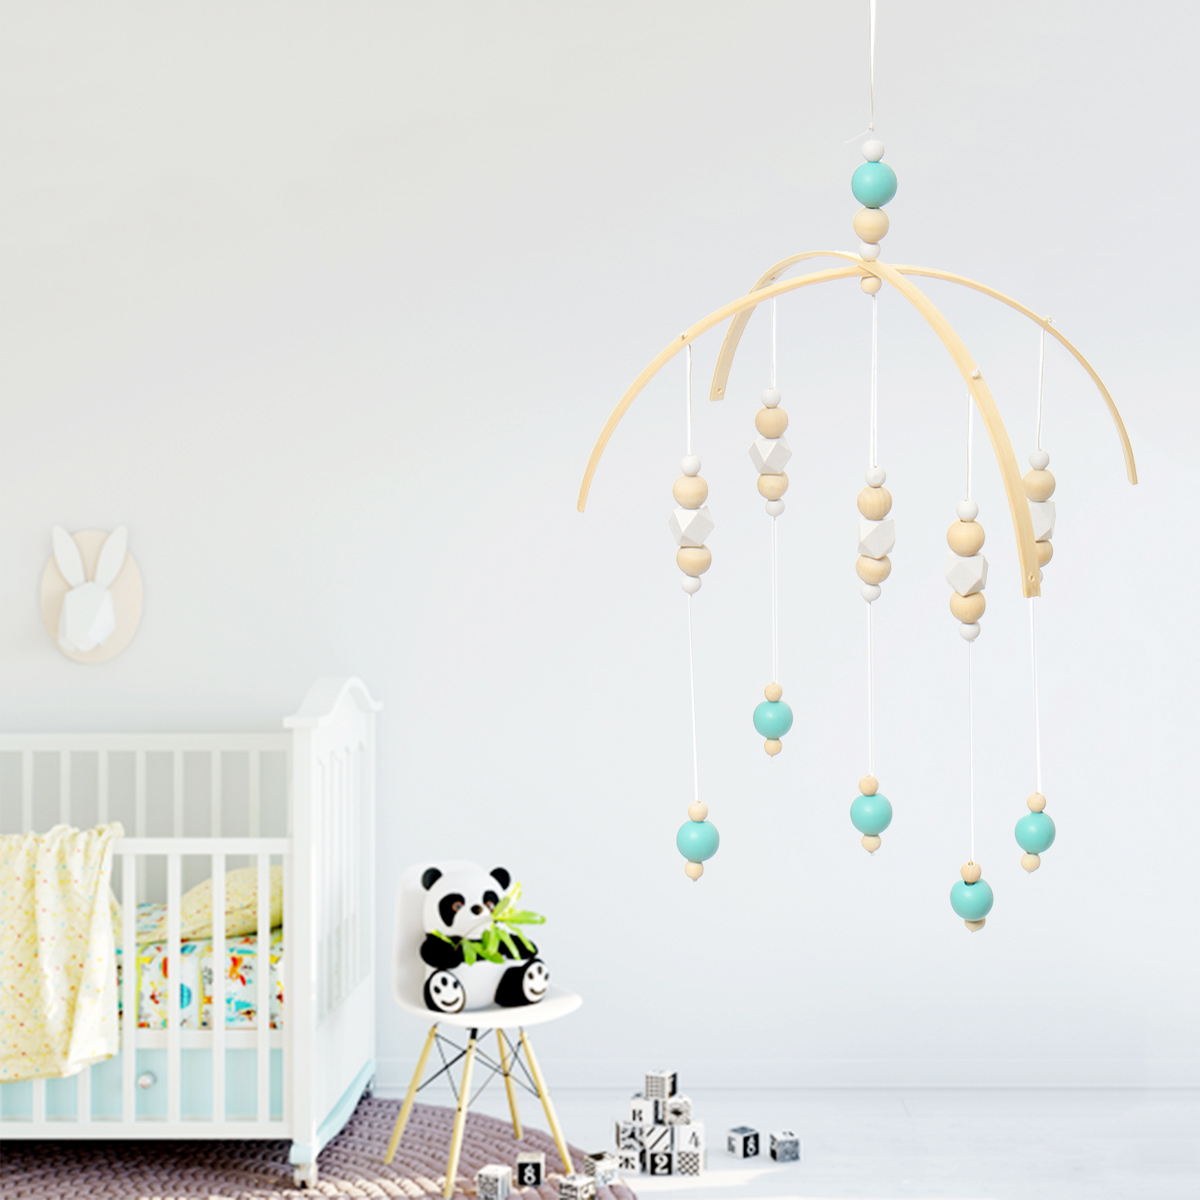 Wooden-Beads-Wind-Chimes-with-Wool-Balls-Baby-Bed-Hanging-Windbell-Crib-Tent-Kids-Room-Decorations-O-1906546-9